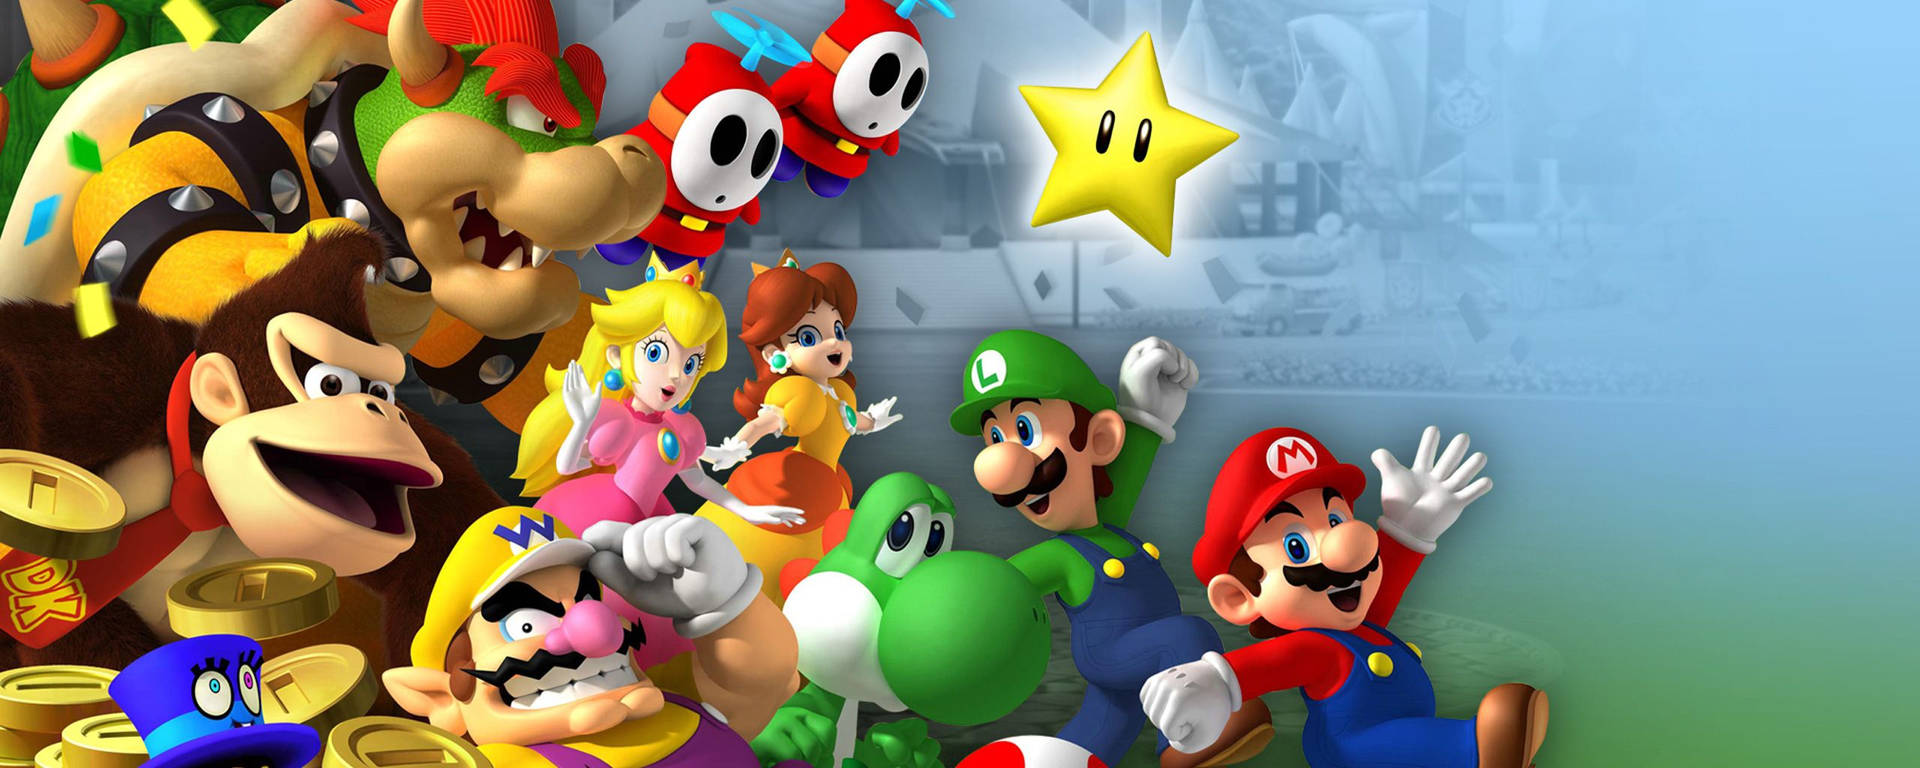 A Group Of Nintendo Characters Are Standing Together Background